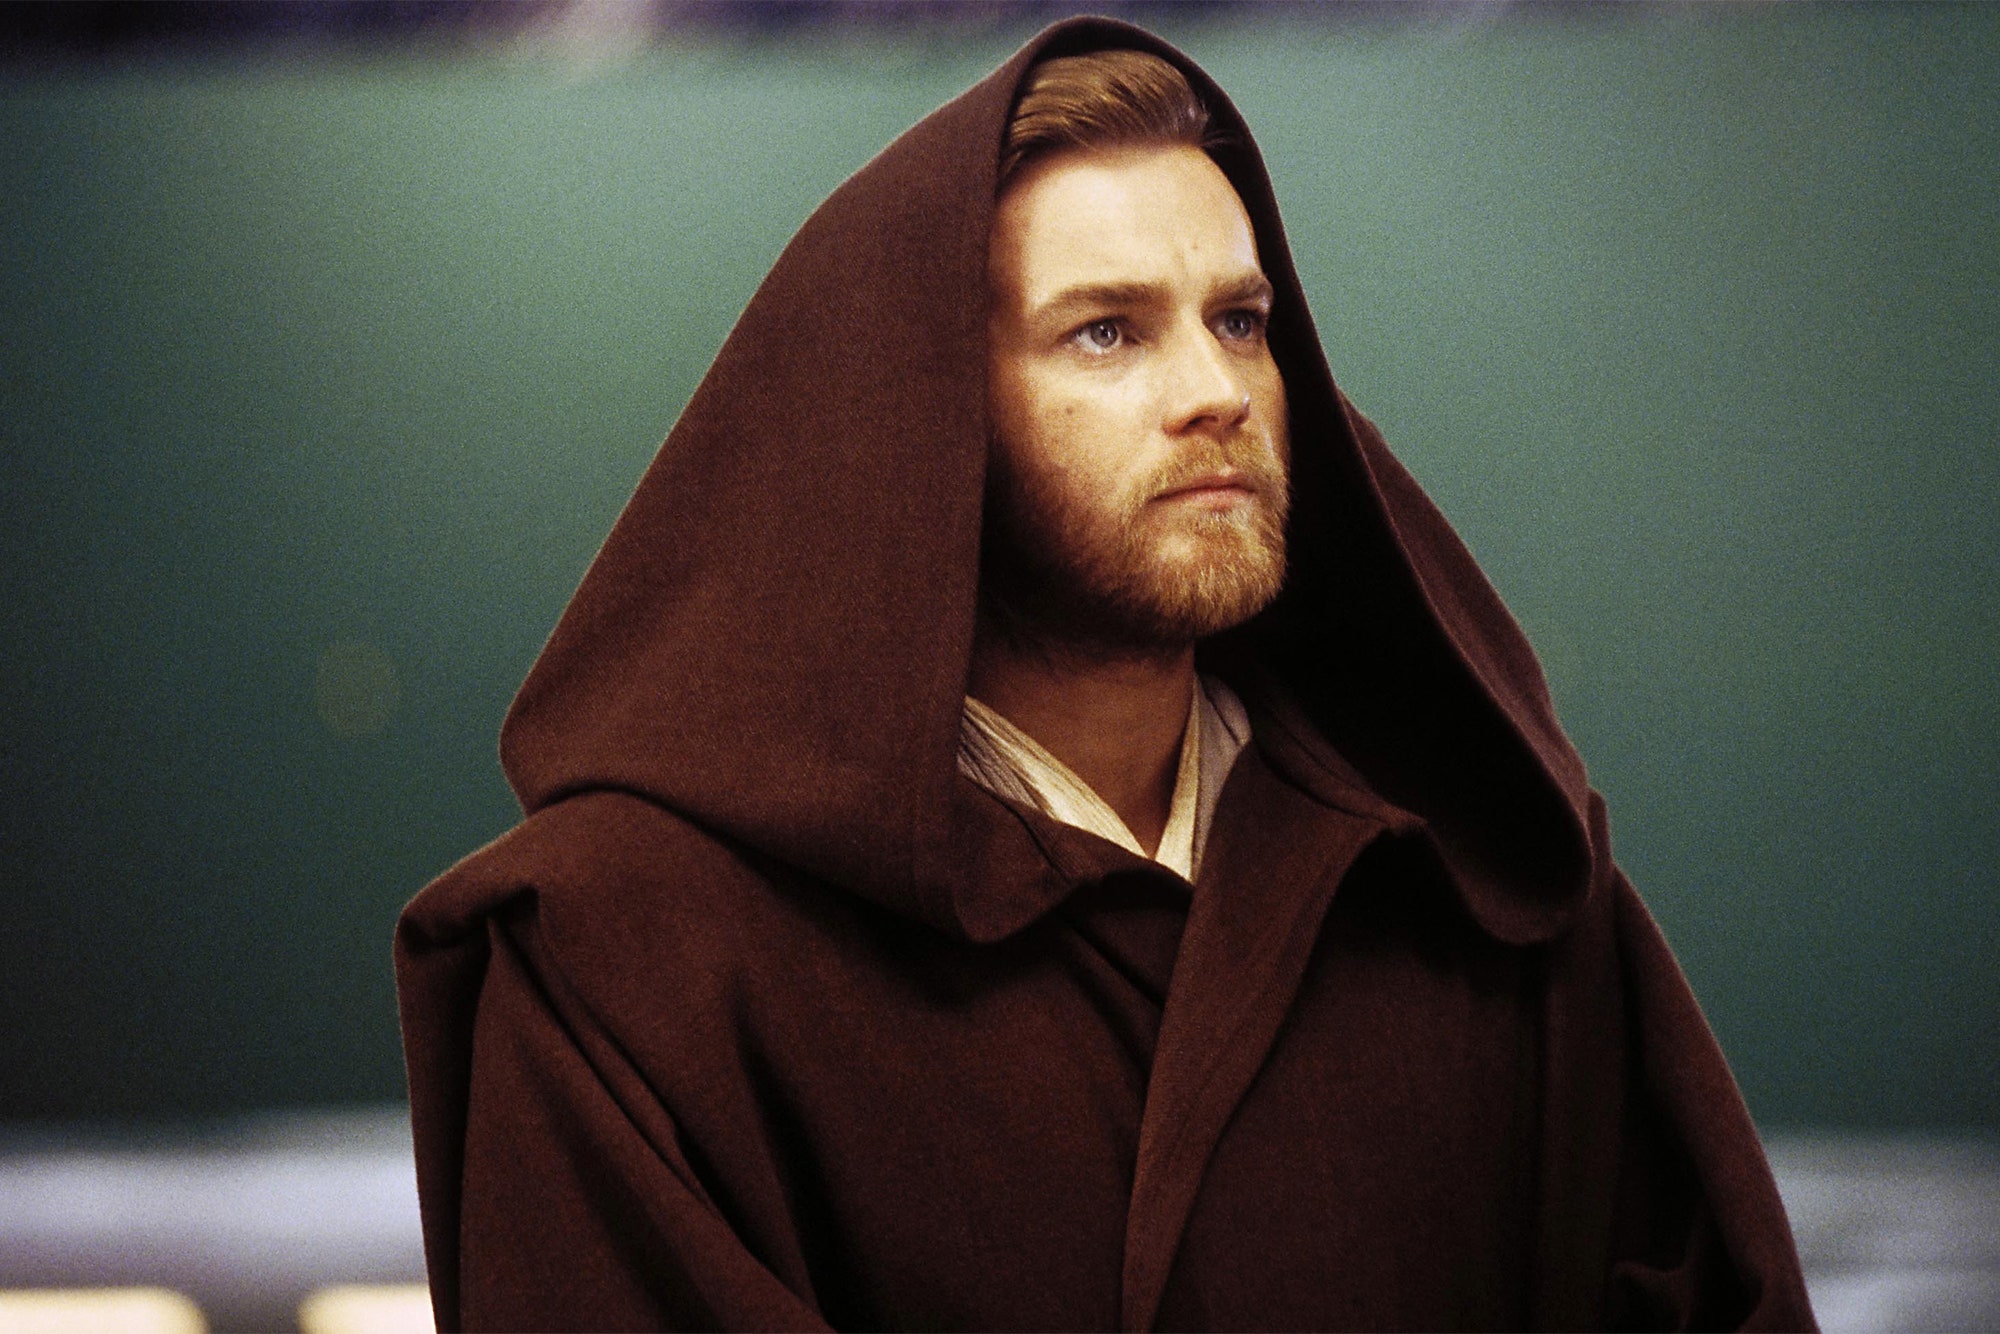 The Obi Wan Kenobi Series Is Delayed—But Not Canceled